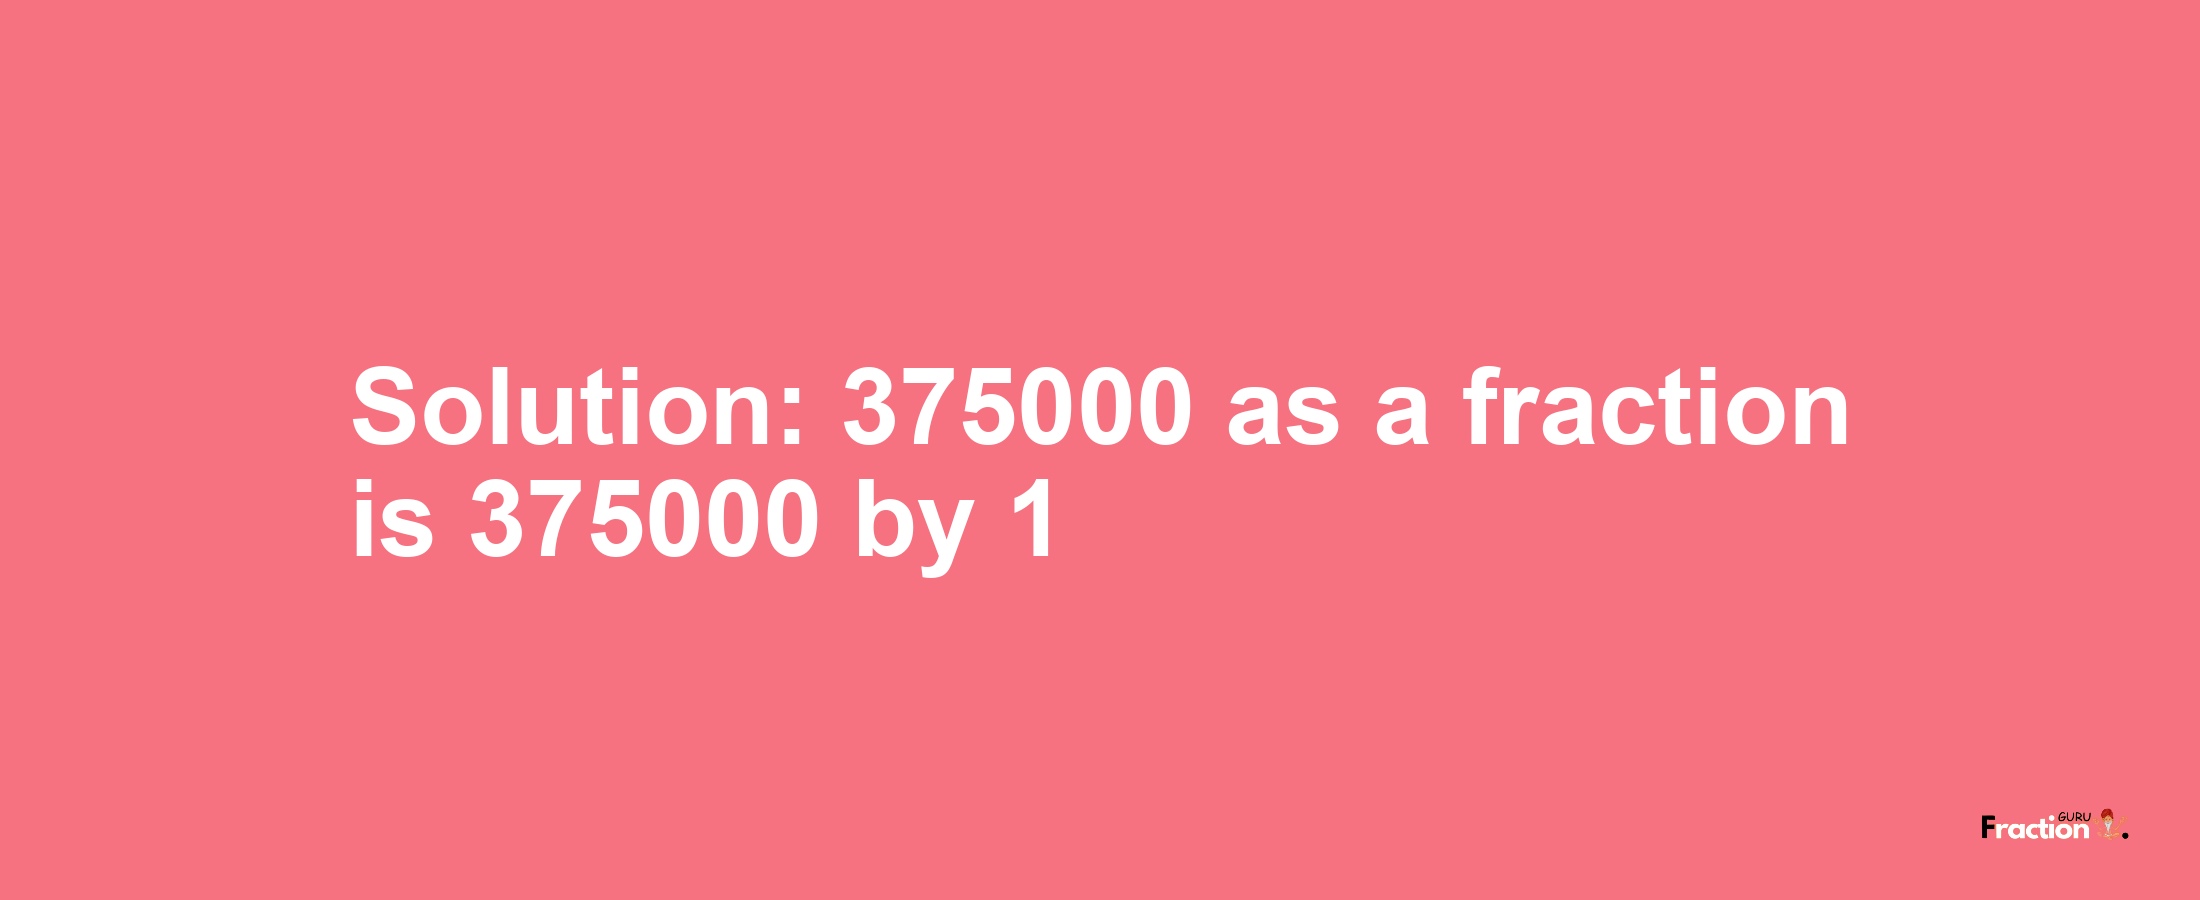 Solution:375000 as a fraction is 375000/1